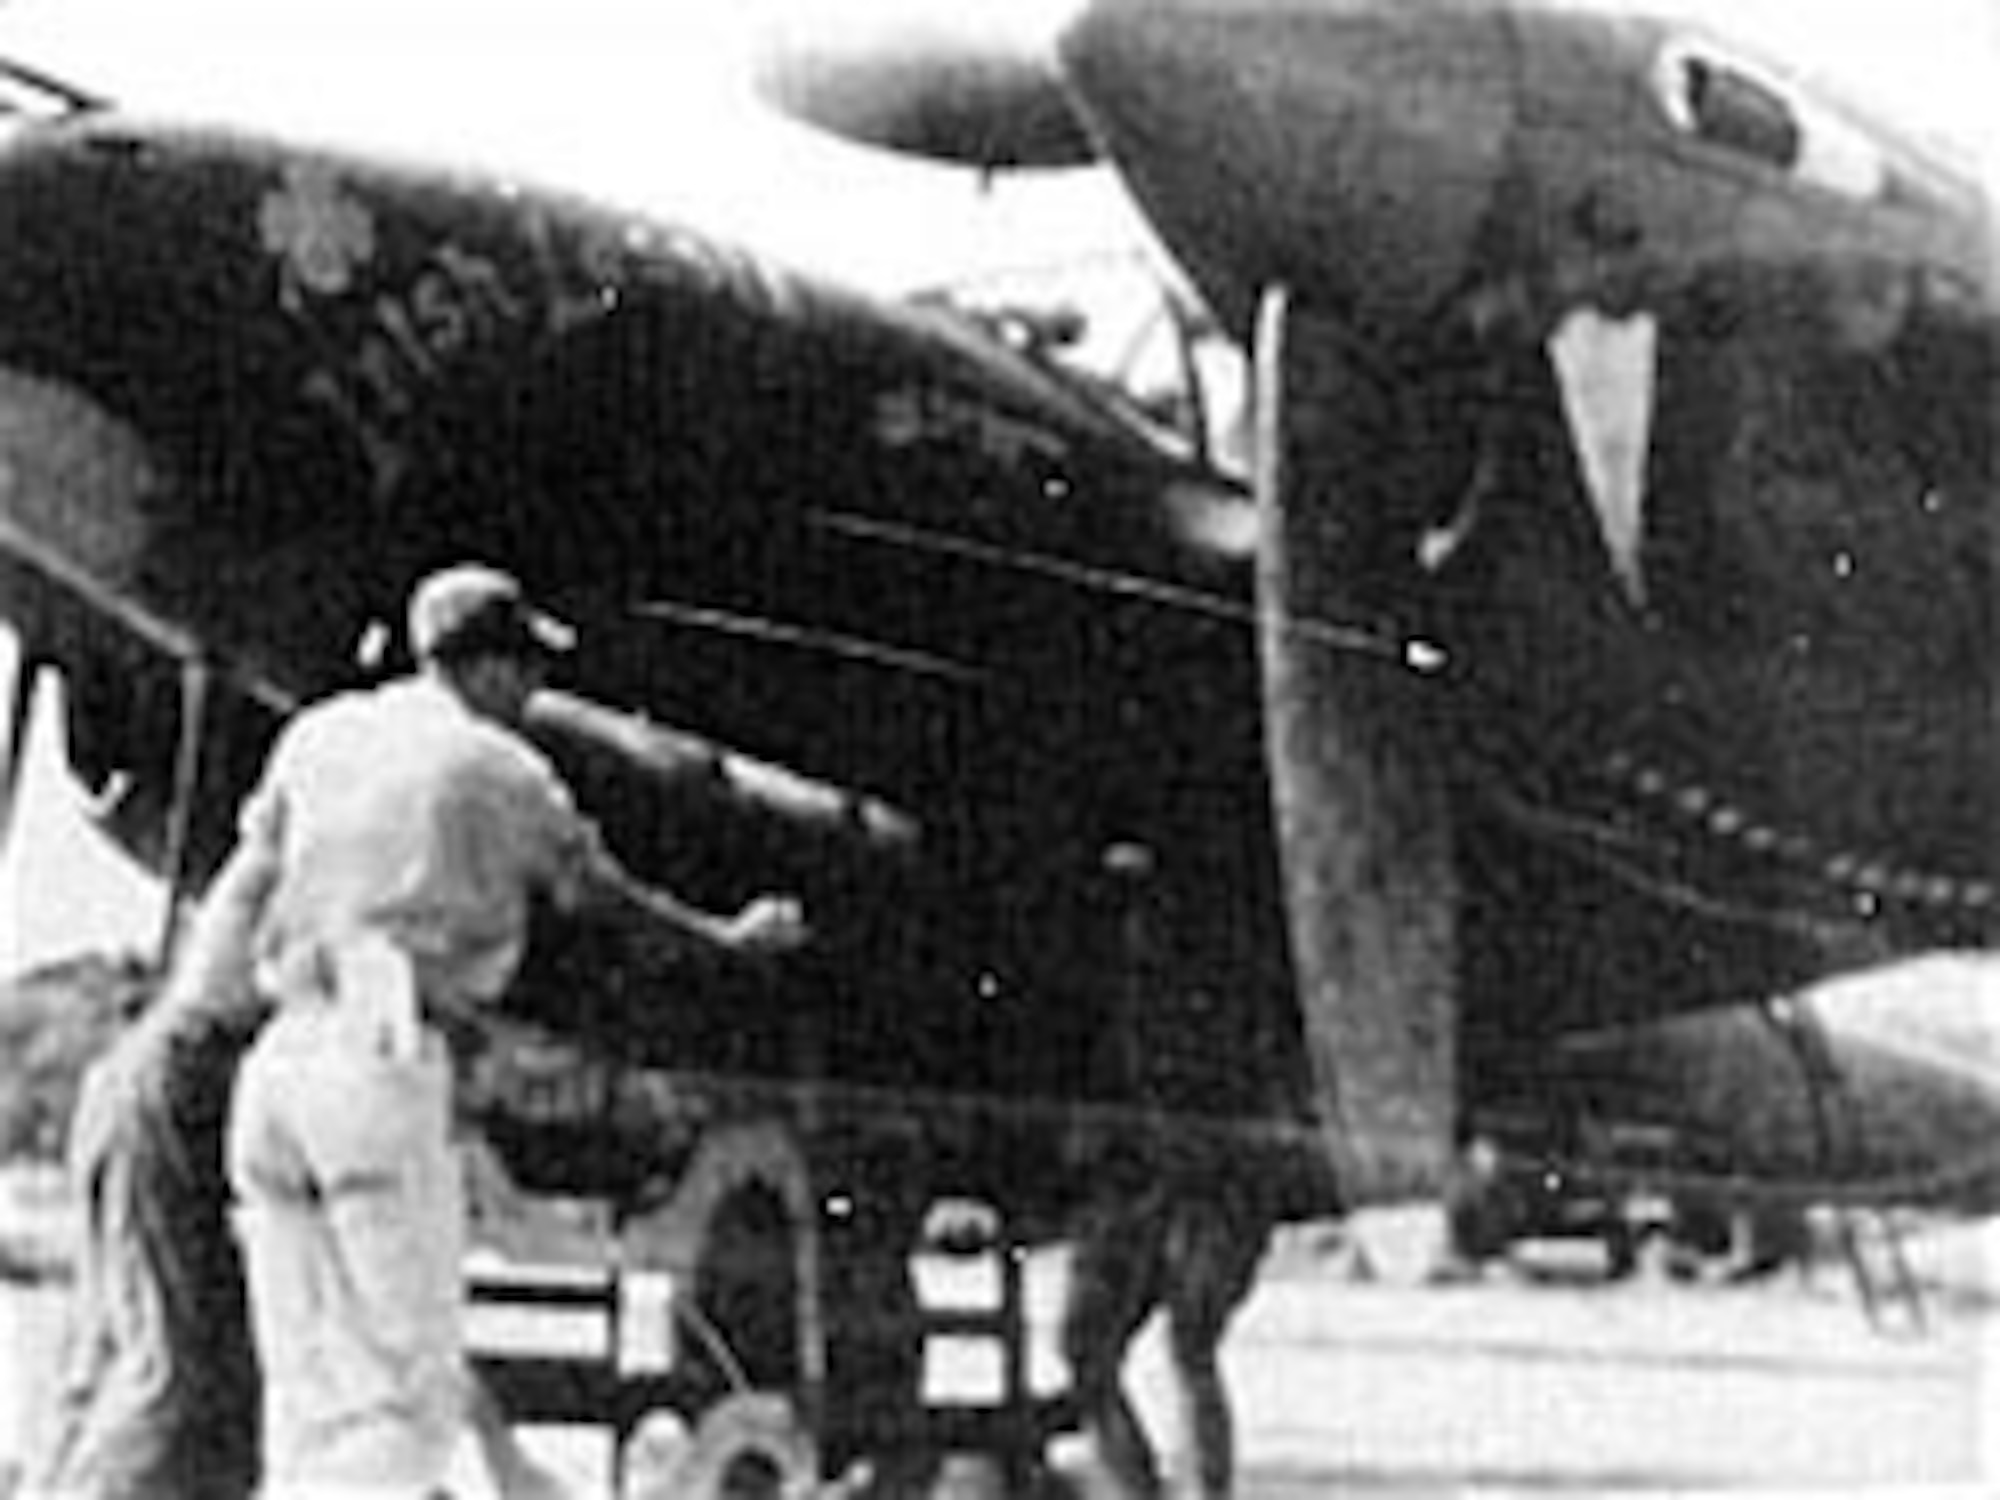 Armorers load a depth bomb on a P-38J Lightning at an airbase in India in January 1945. Such bombs could be fused for either underwater or surface targets. (U.S. Air Force photo)